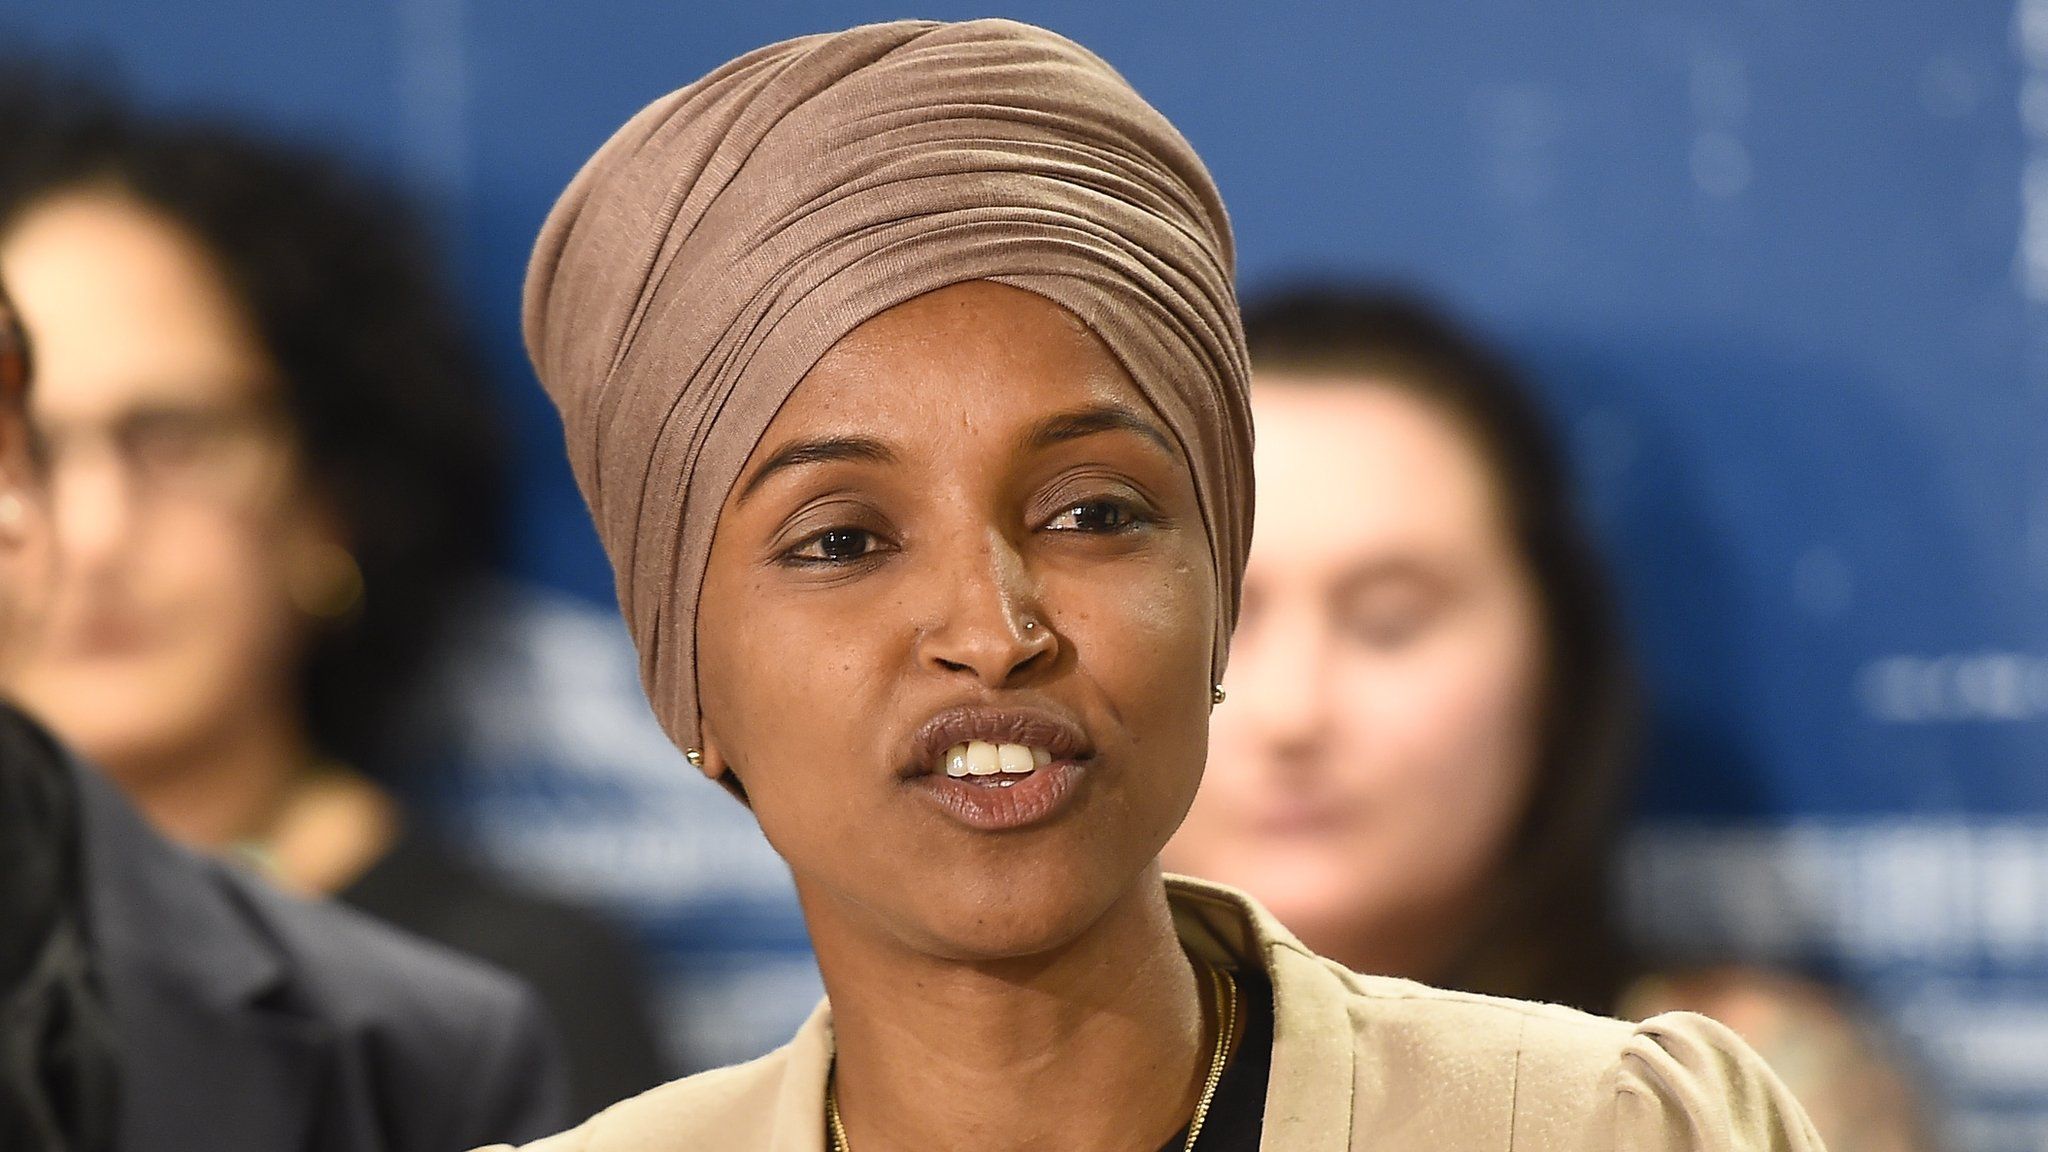 Democratic Representative from Minnesota Ilhan Omar speaks during a news conference at the Minnesota state capitol